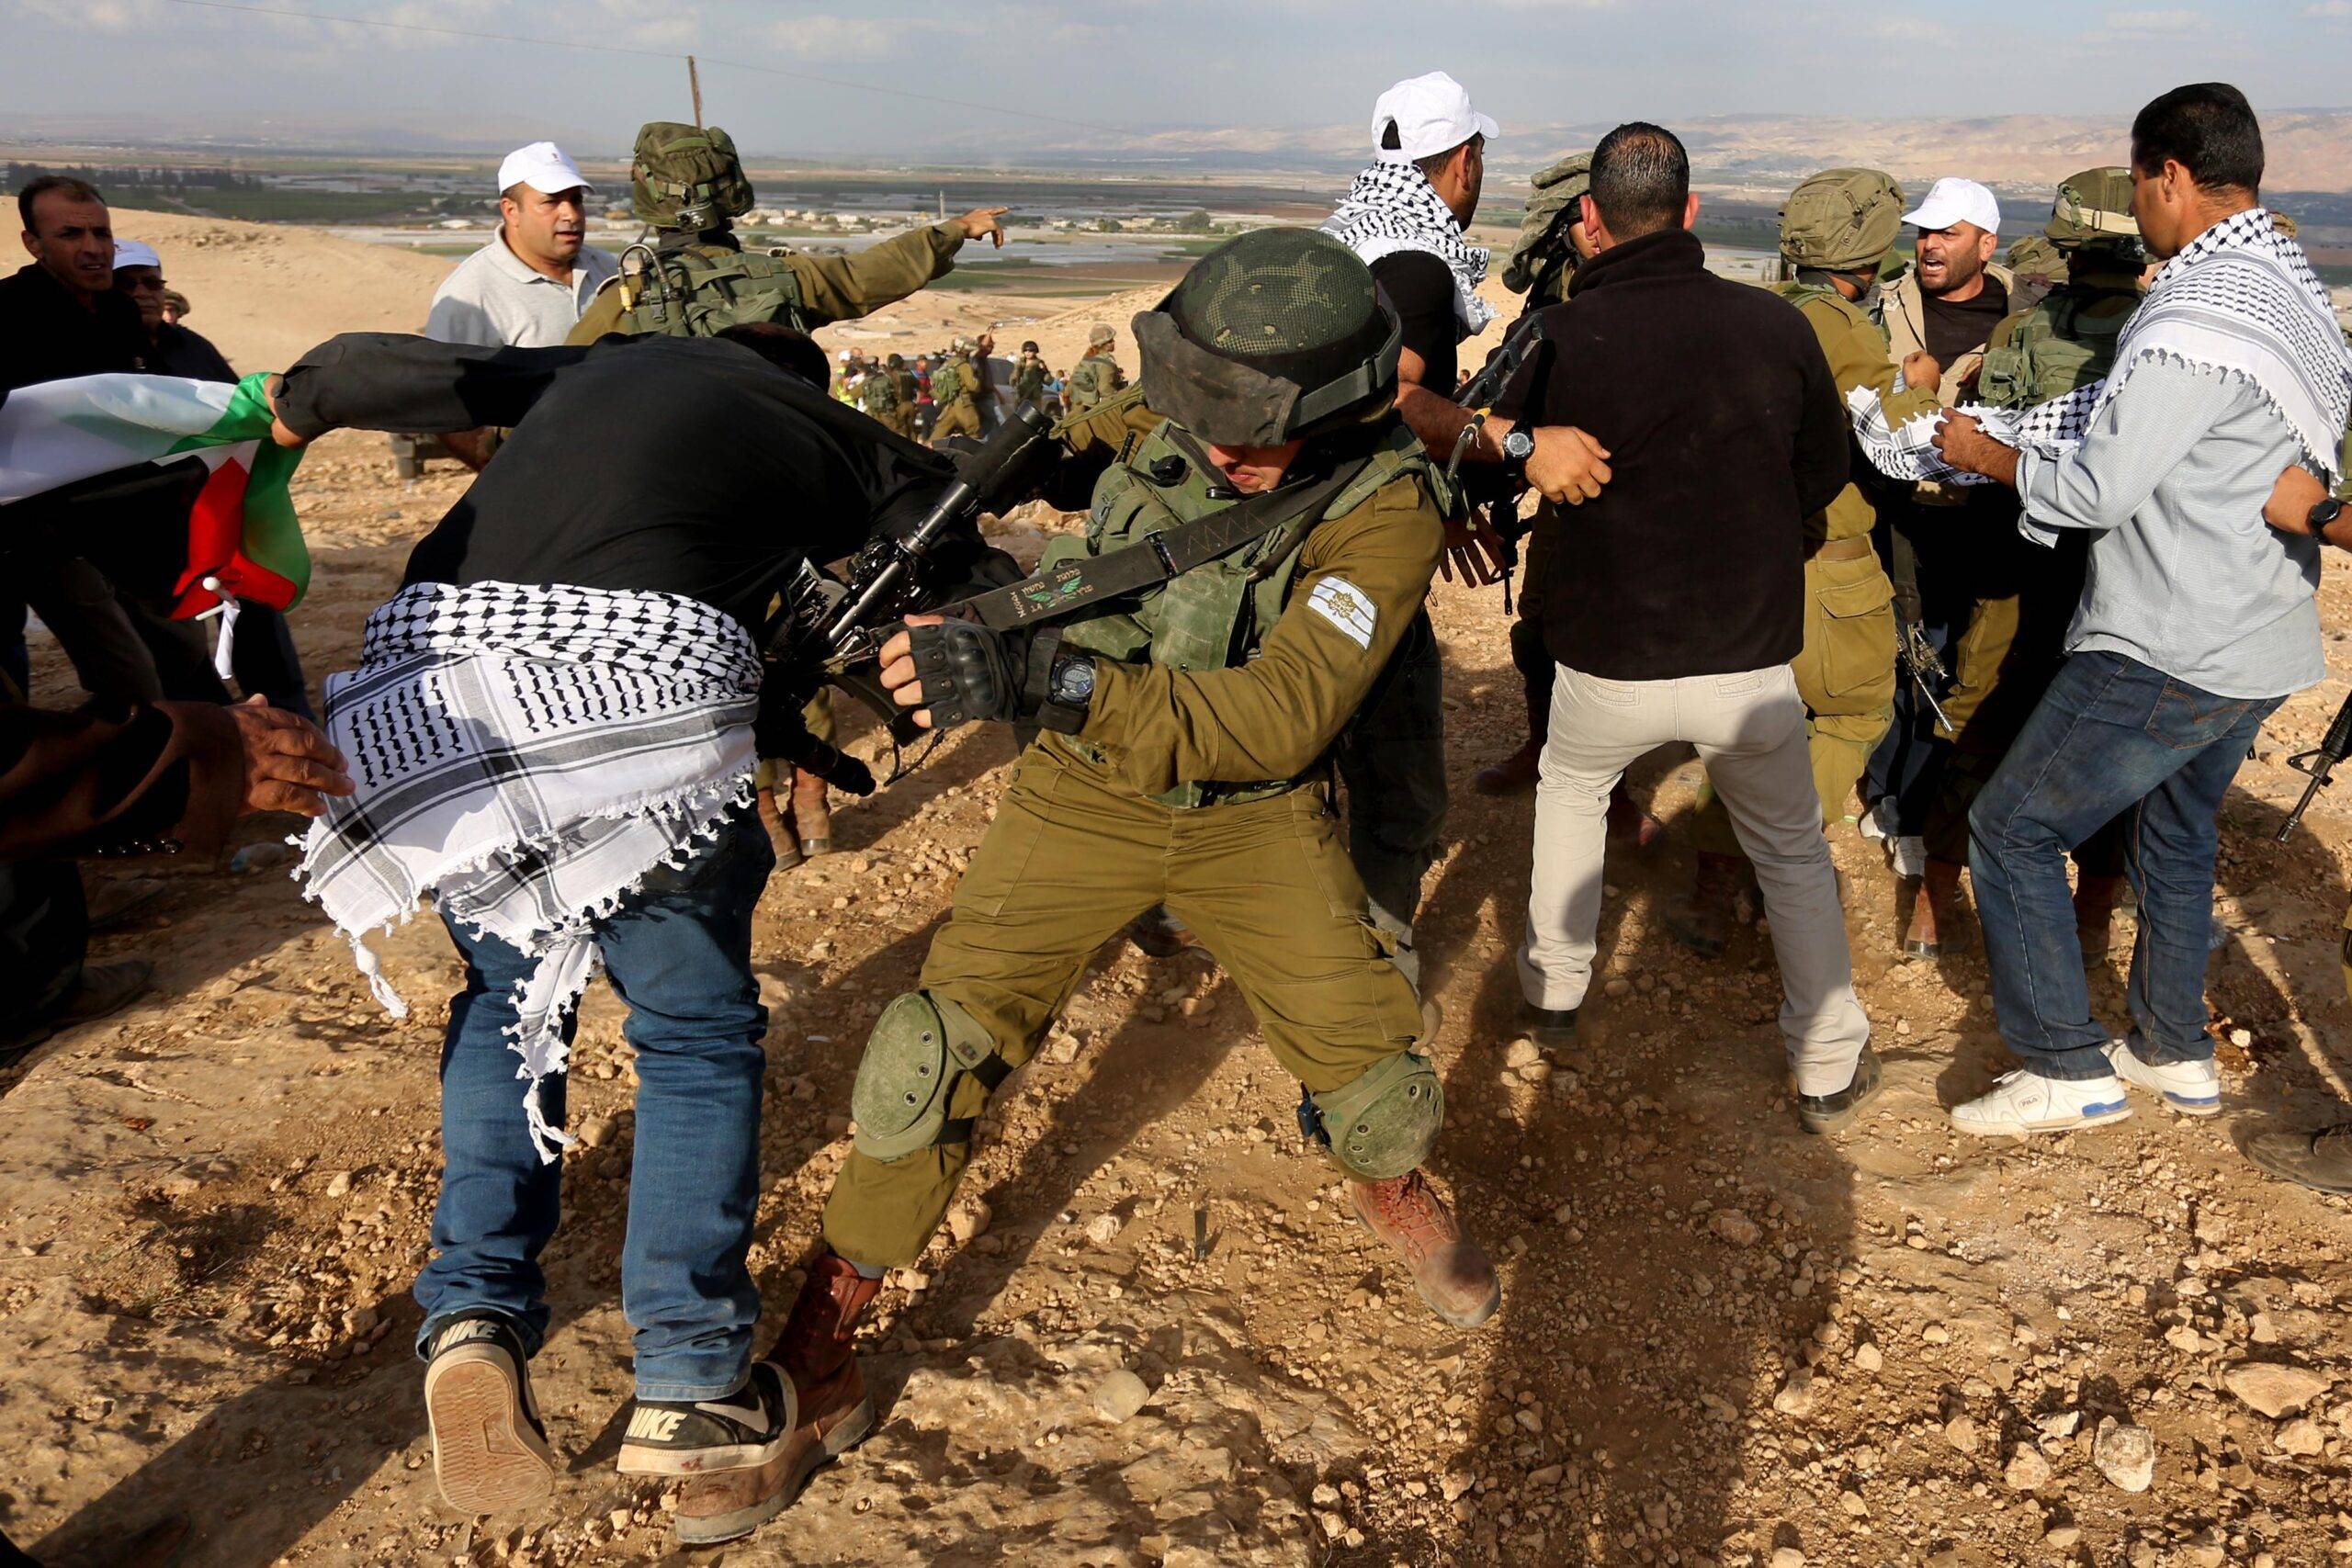 Israeli security forces brutally arrest Palestinian protesters in West Bank [Issam Rimawi - Anadolu Agency]